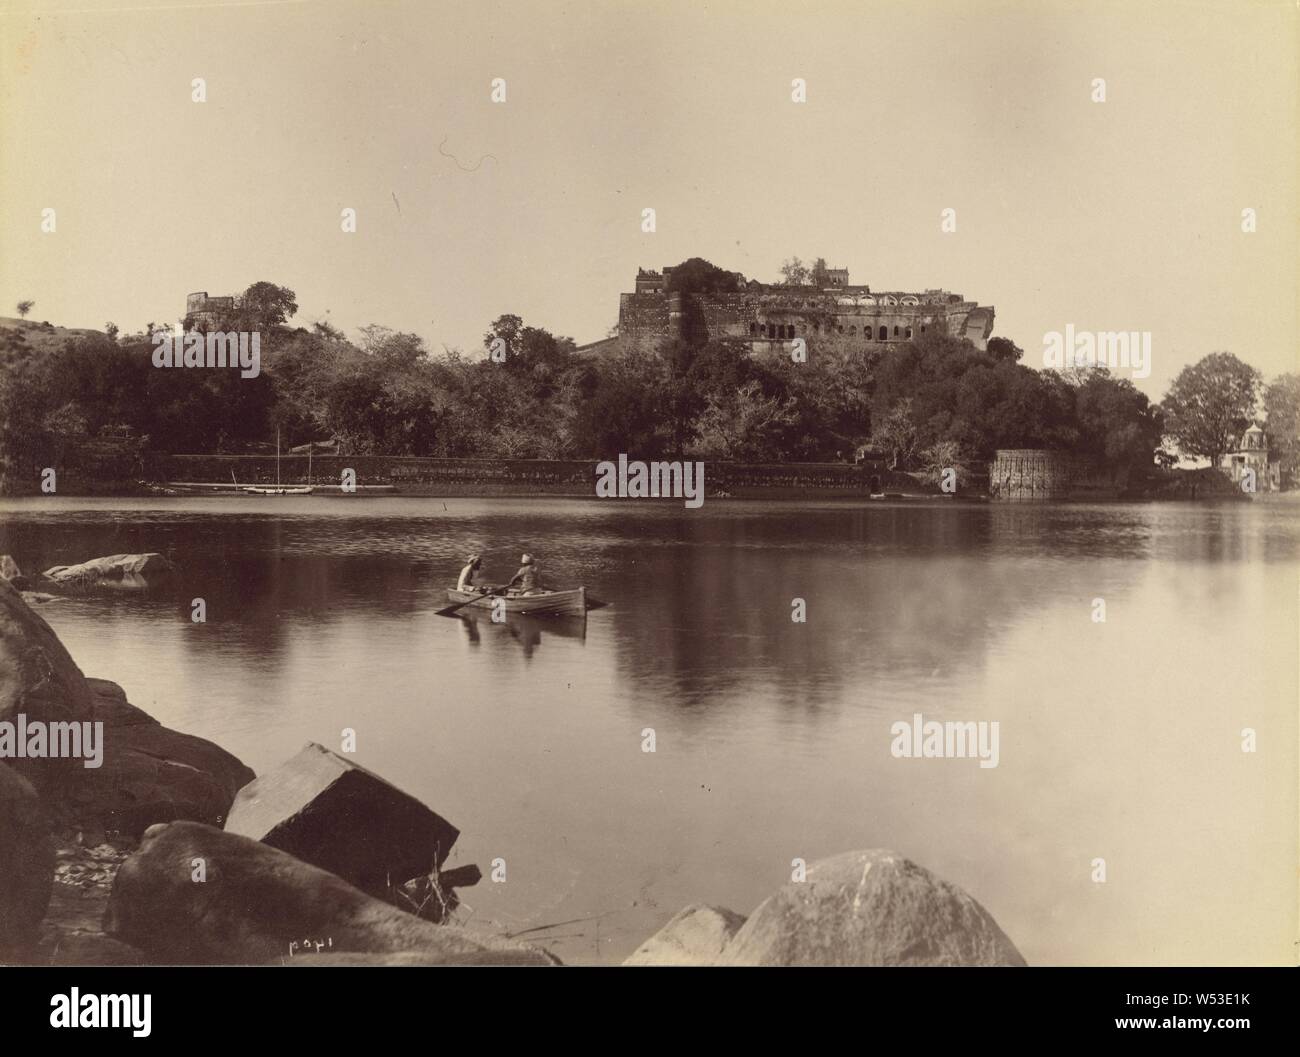 Temple in Distance with Boaters in Foreground, Lala Deen Dayal (Indian, 1844 - 1905), Barwa Sagar, India, 1882, Albumen silver print, 19.5 × 26 cm (7 11/16 × 10 1/4 in Stock Photo